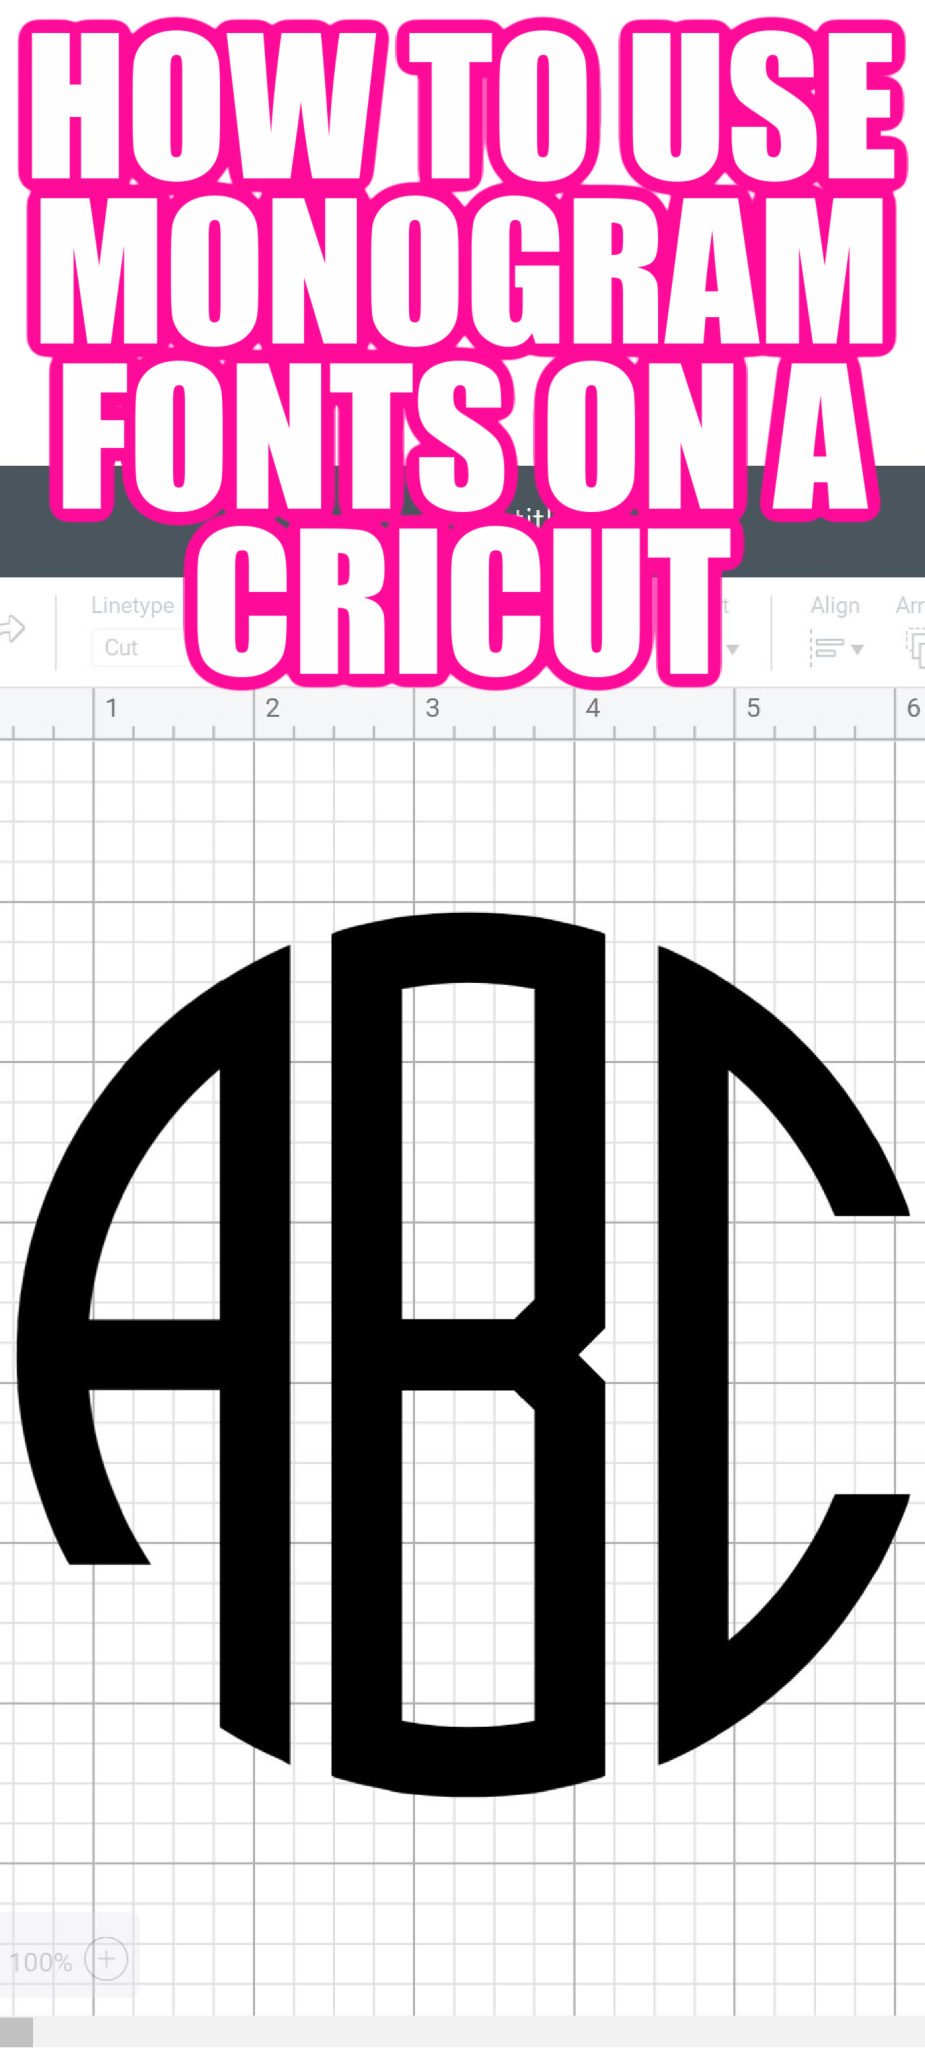 Learn how to use monogram fonts on your Cricut and get some links to some fonts to download and use for your projects! #monogram #cricut #cricutmonogram